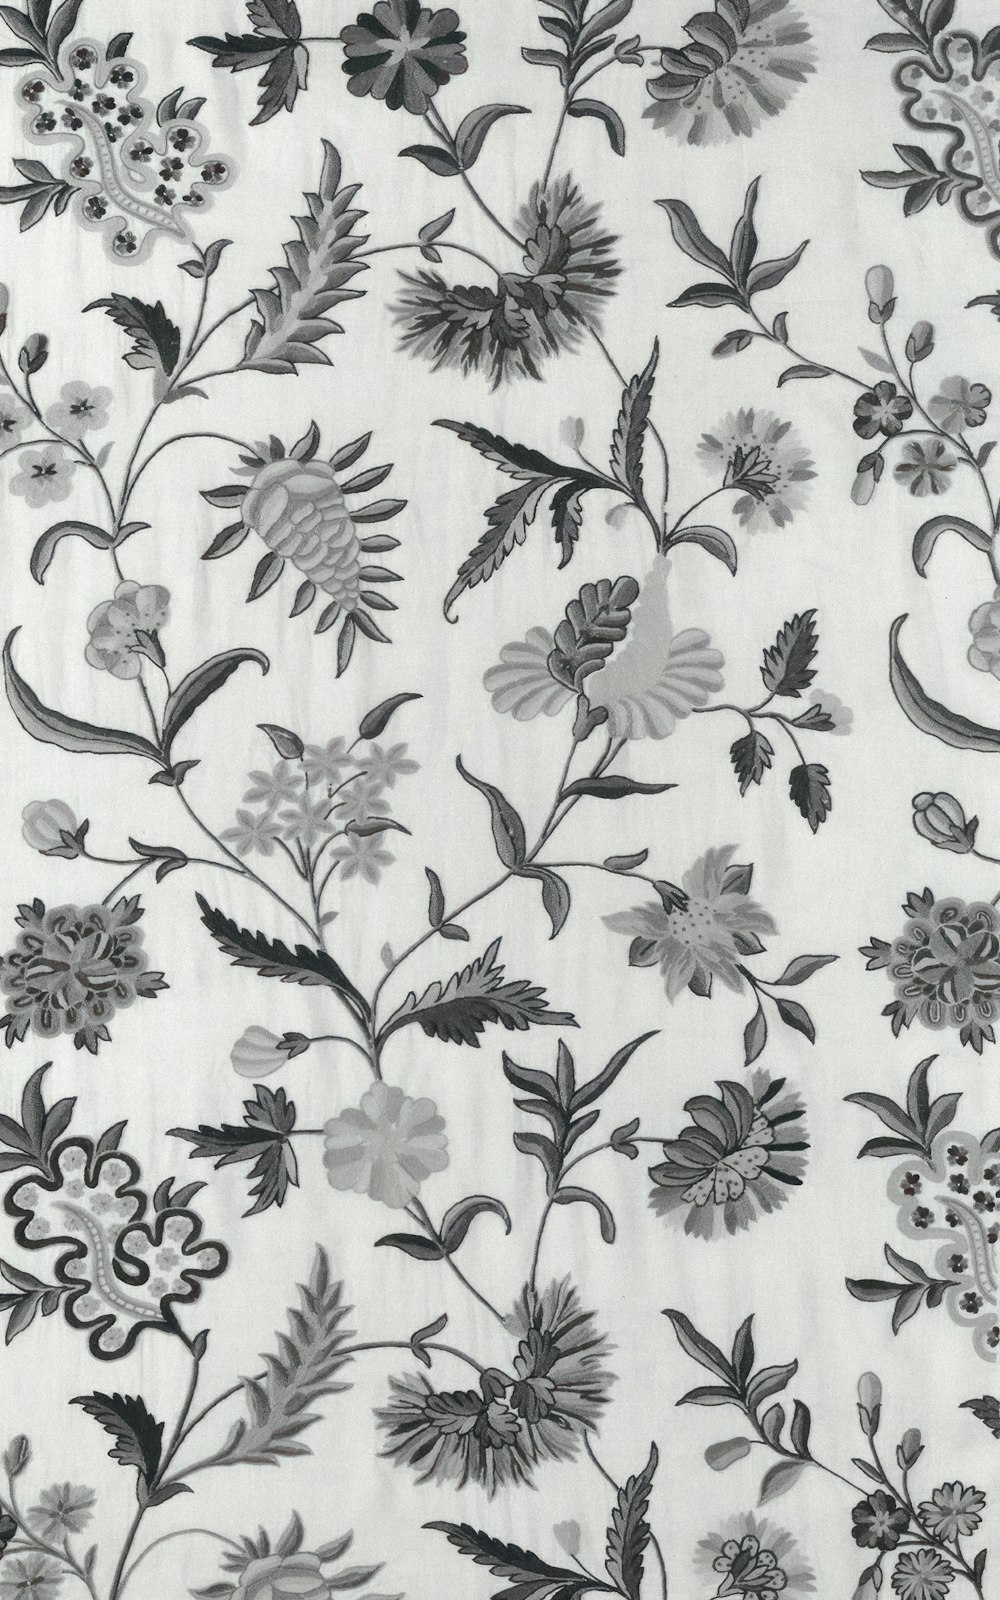 a black and white floral pattern on a white background